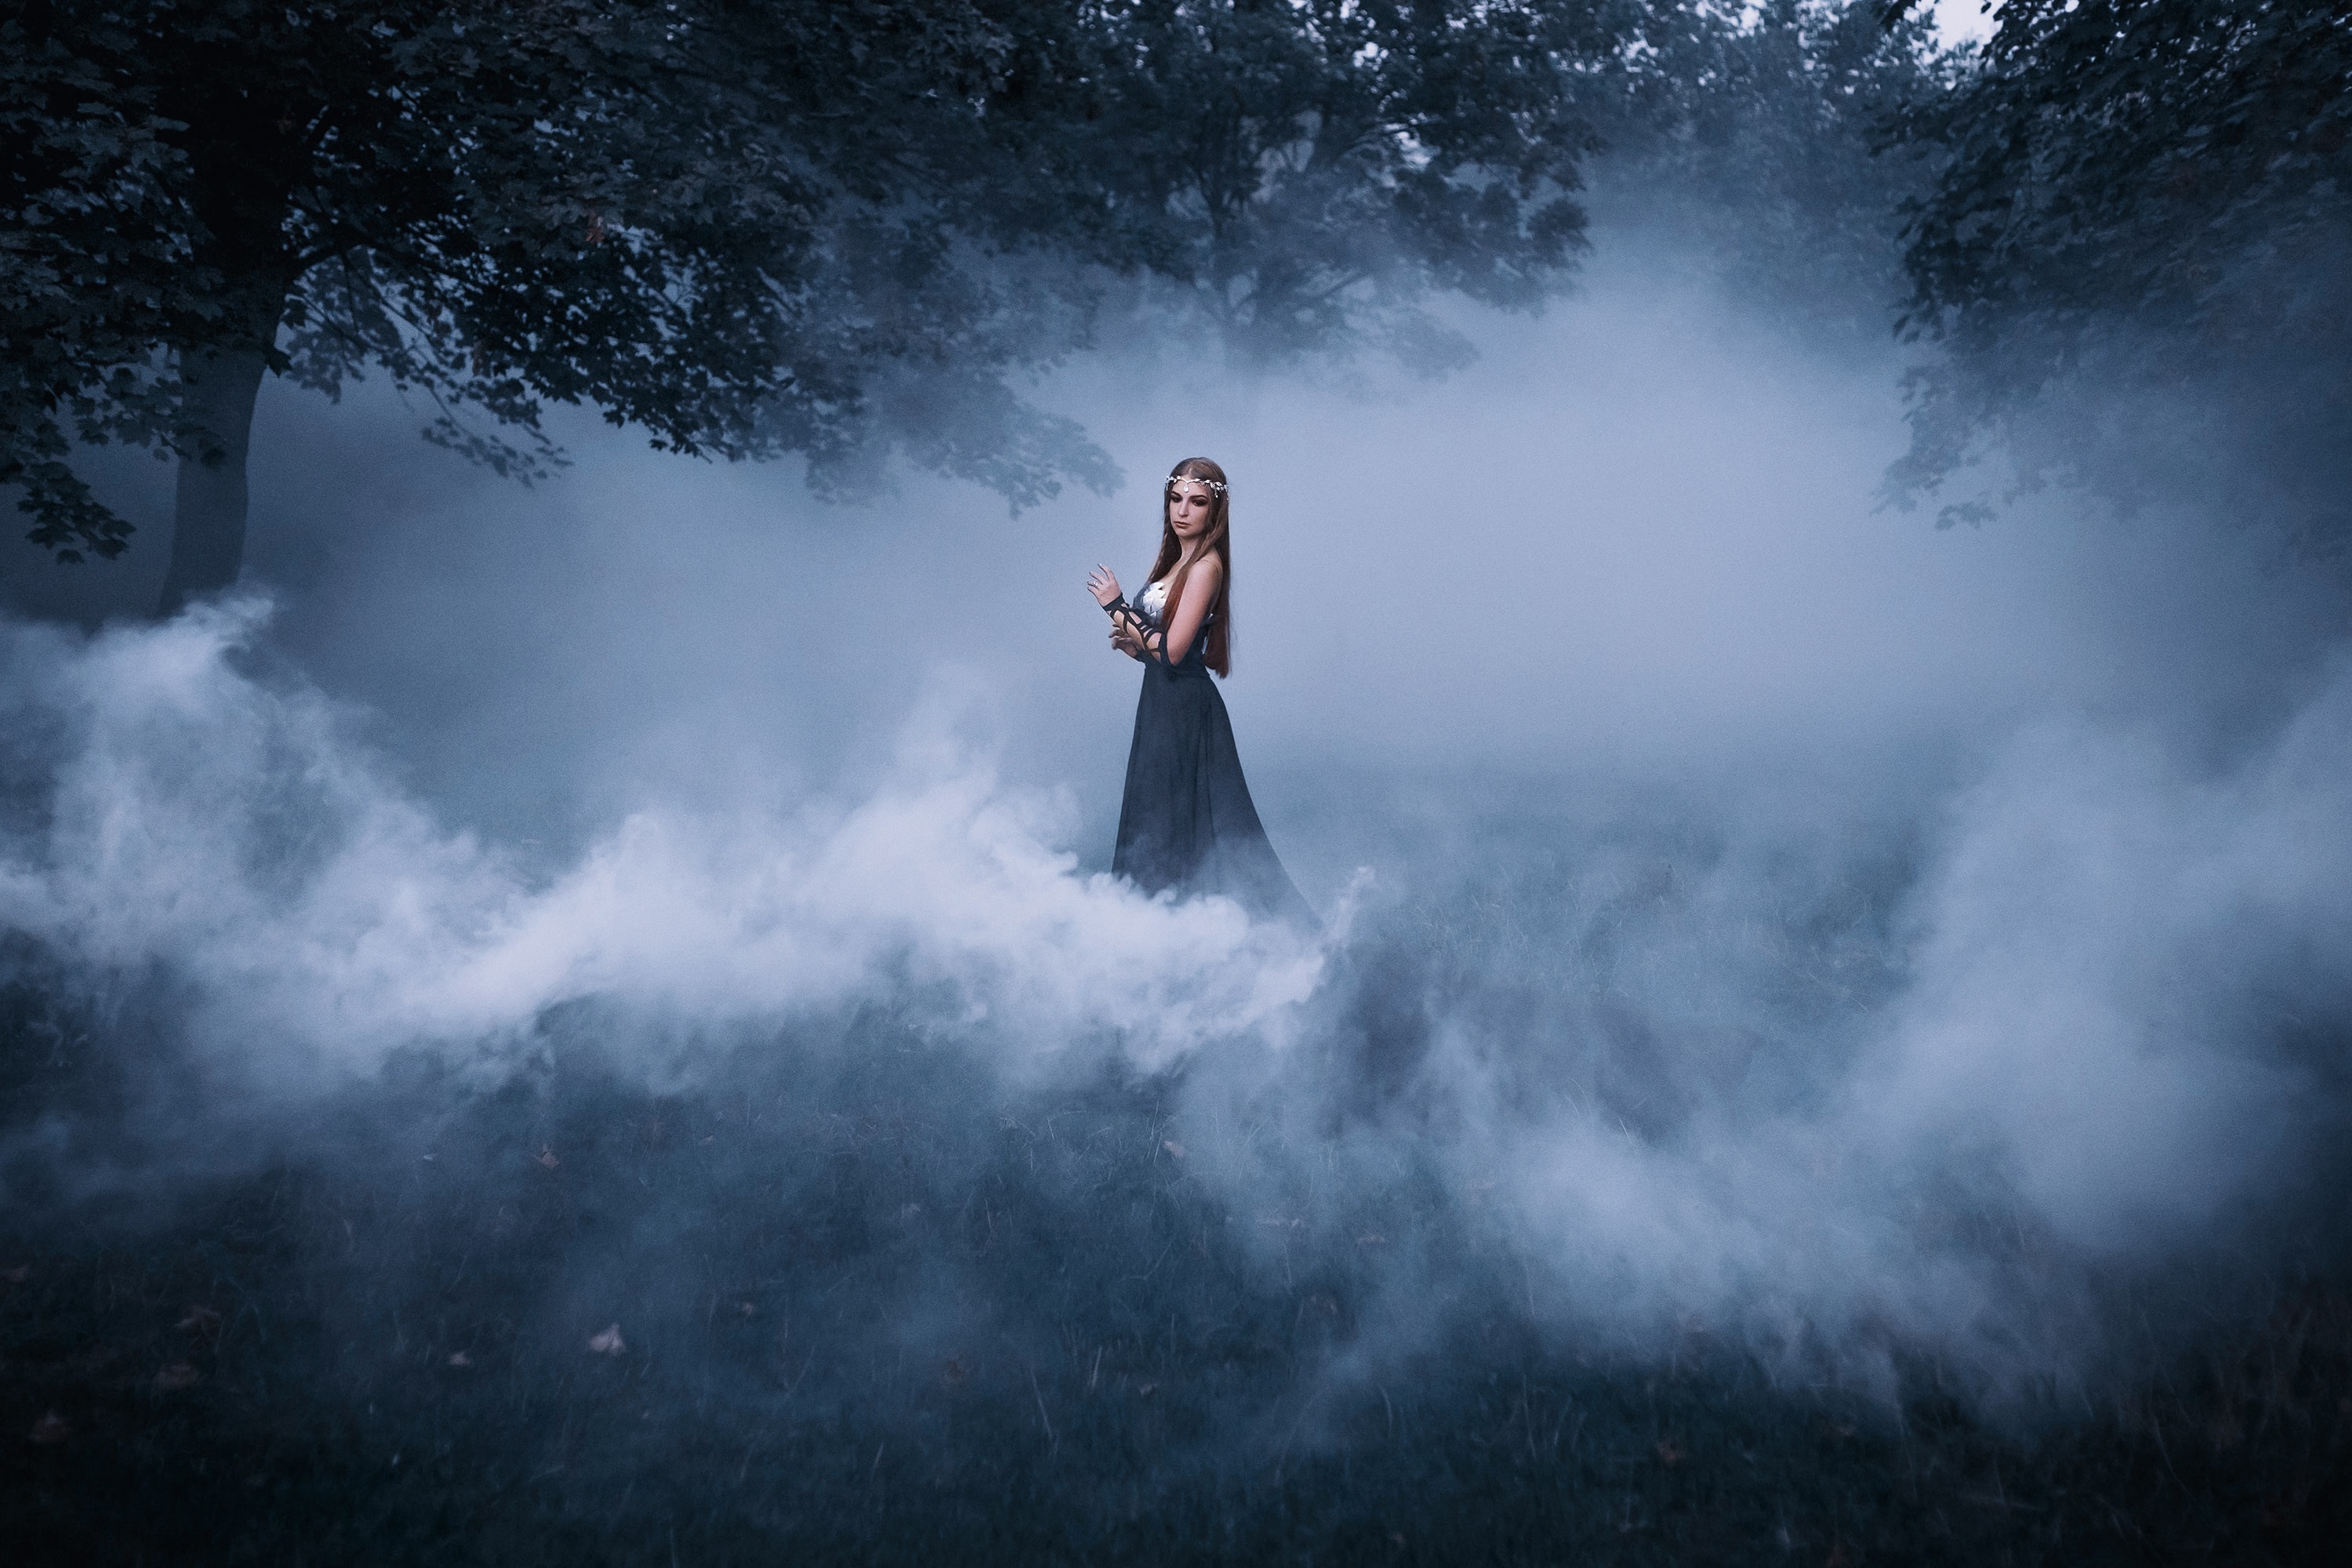 The dark queen of elves walks in a misty forest. A creative imag